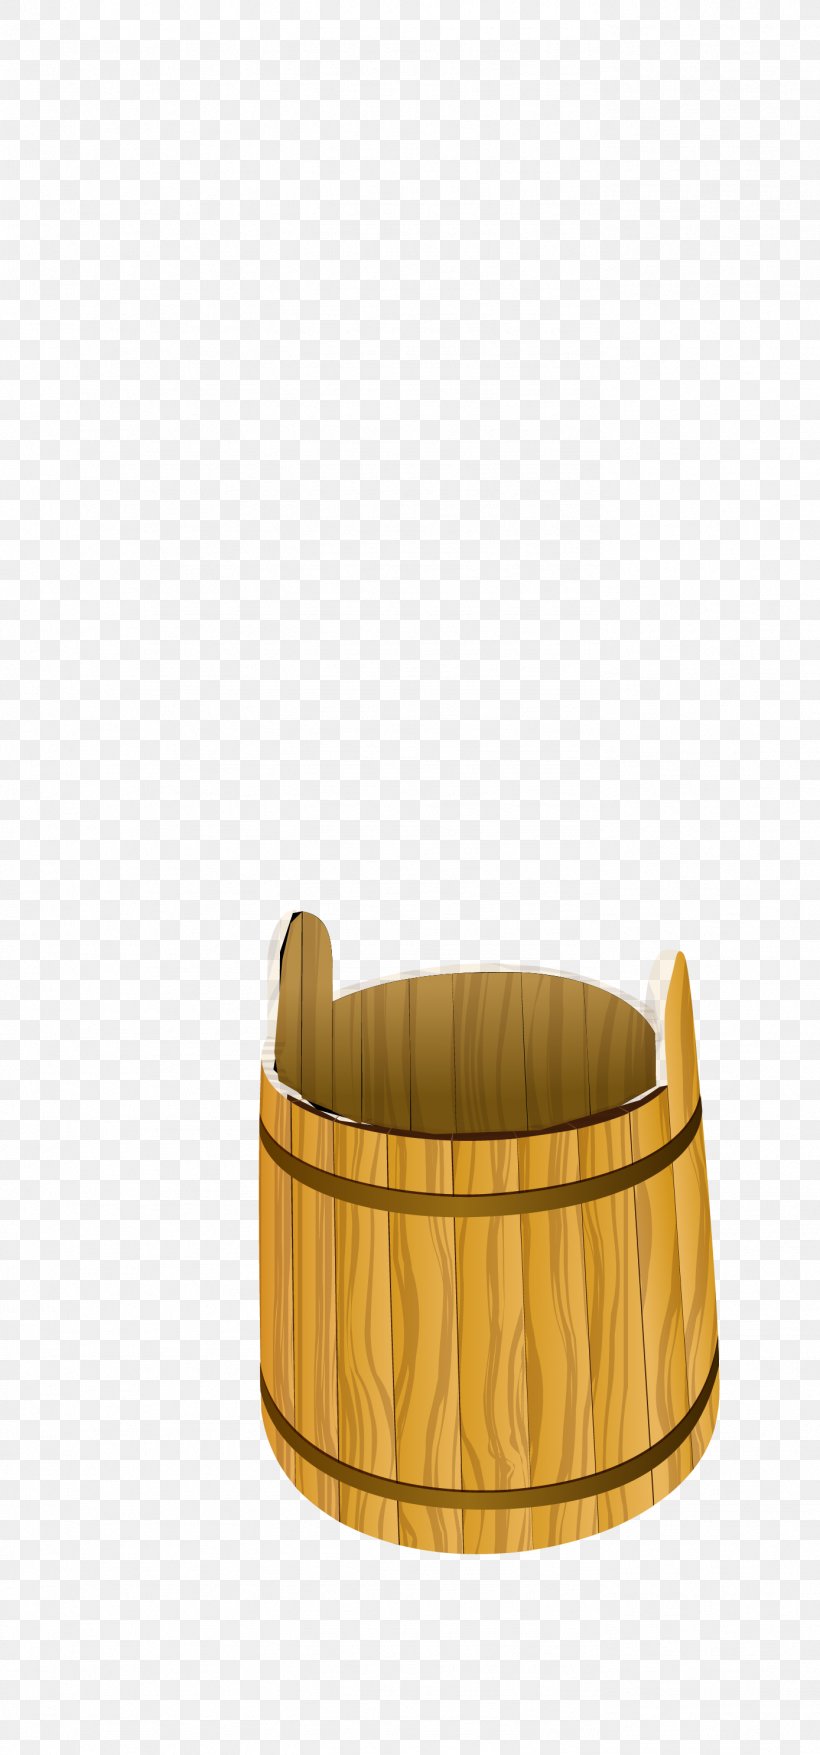 Euclidean Vector Bucket Illustration, PNG, 1388x2972px, Bucket, Cleaning, Dessin Animxe9, Water, Yellow Download Free